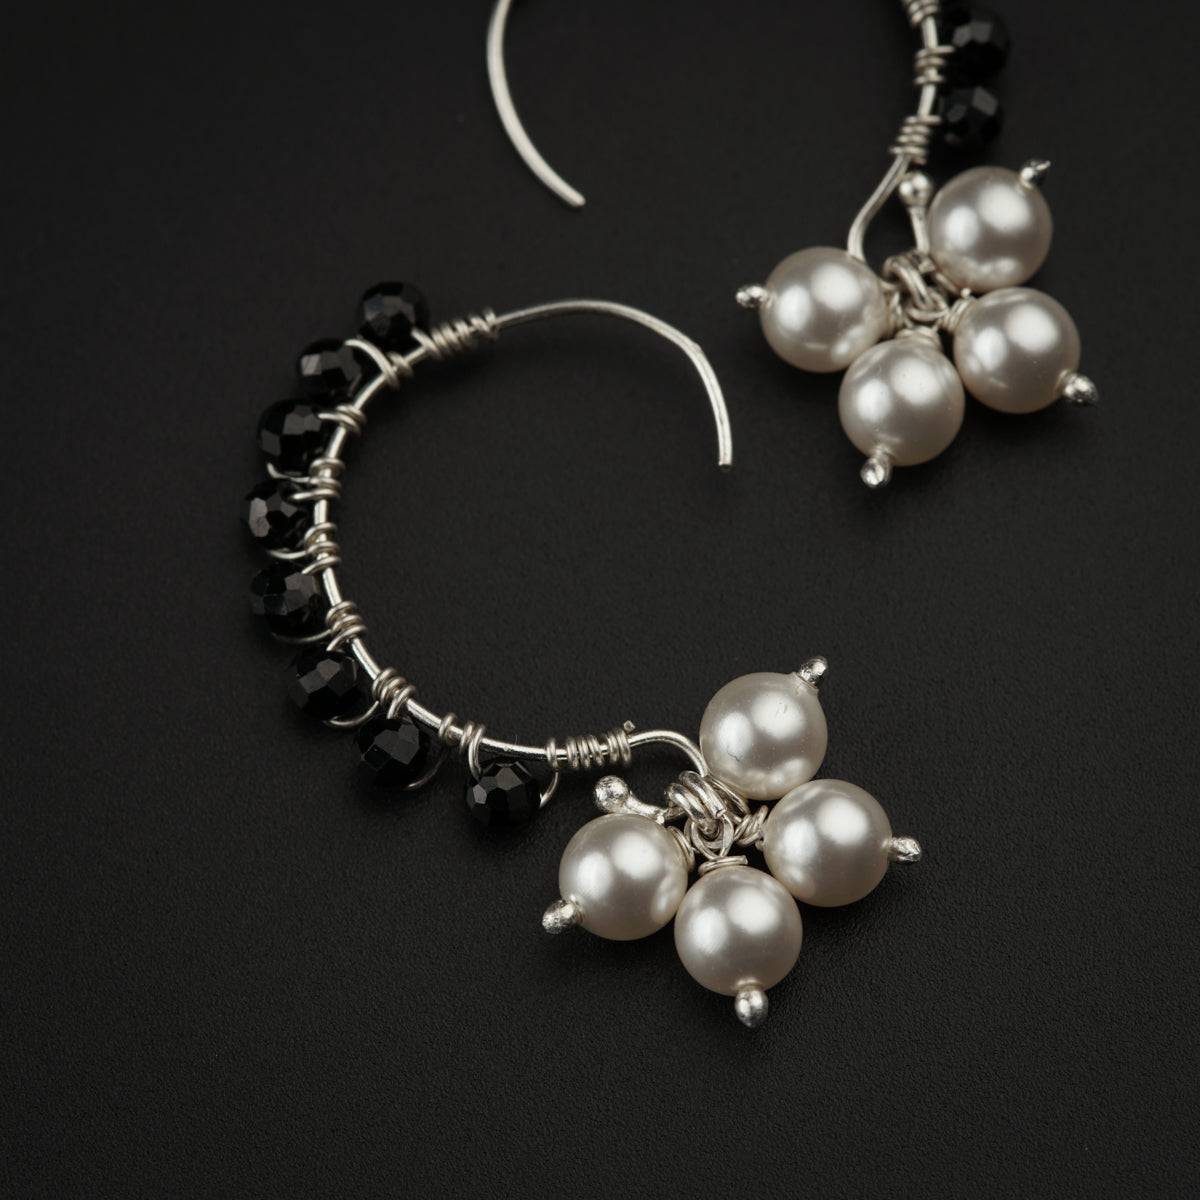 Hook Style Earring with Pearls and Black Spinel